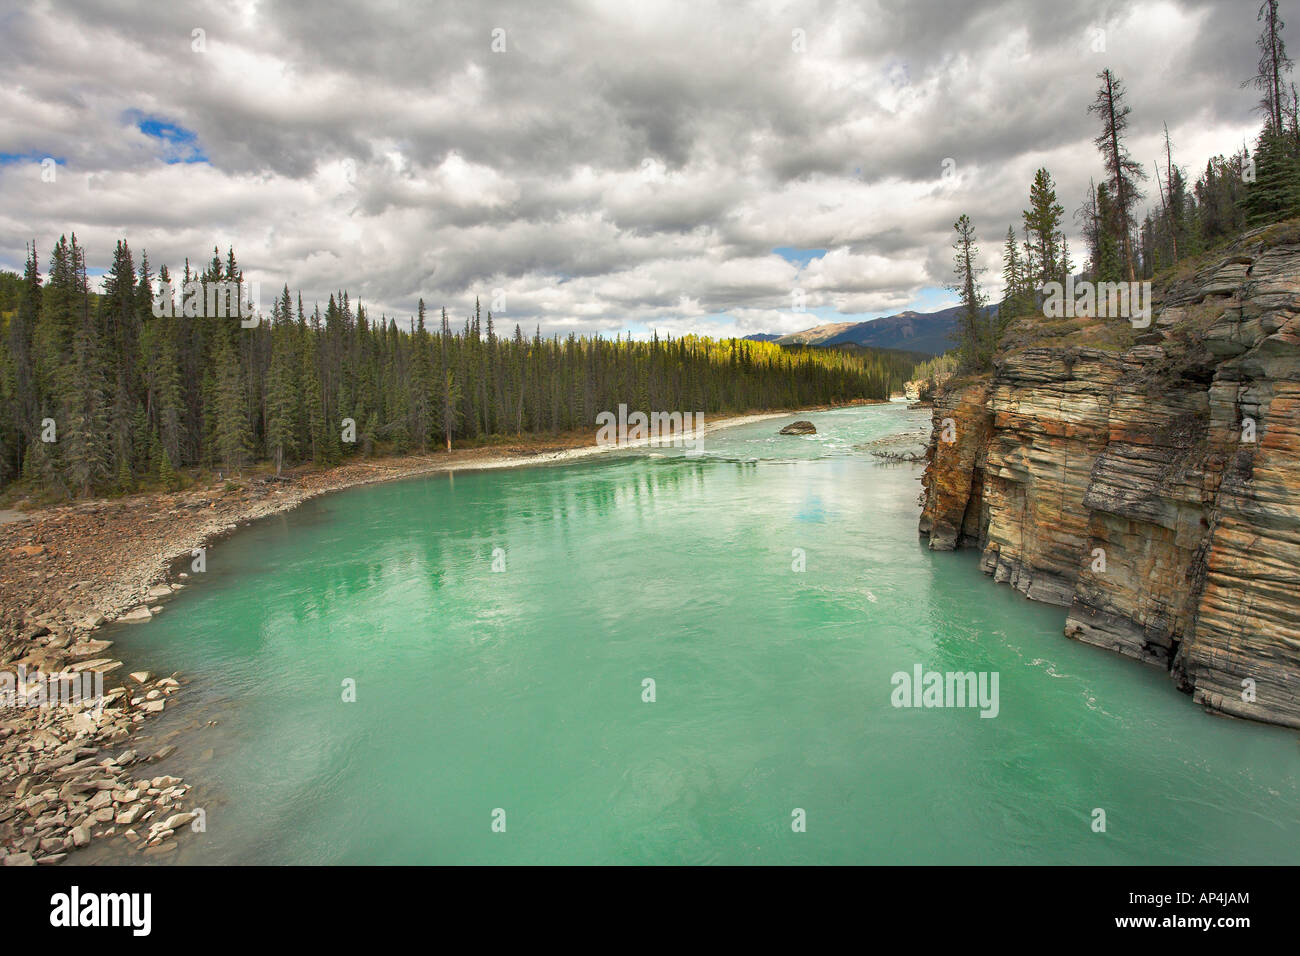 Flood of the river Athabasca after a powerful falls Stock Photo